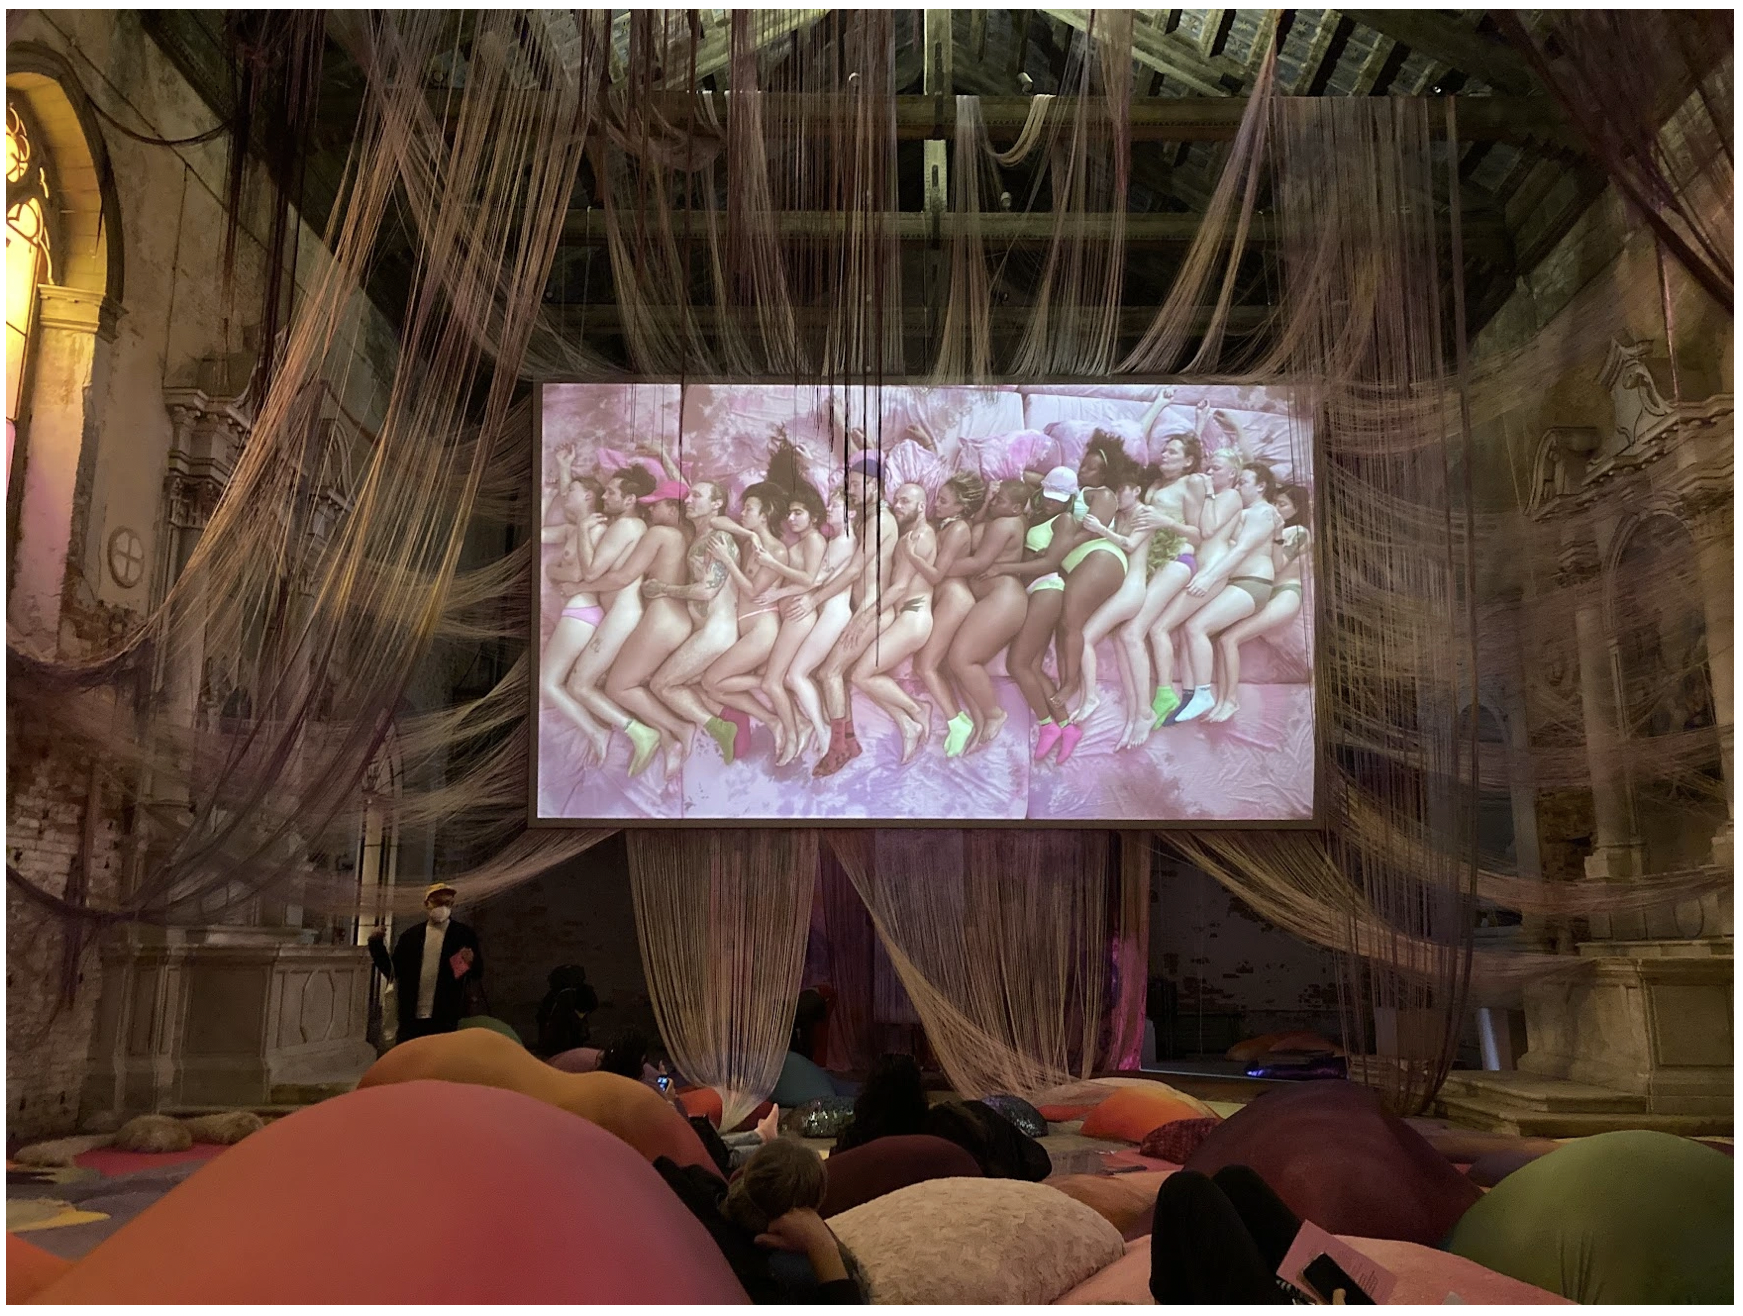 A large industrial hall is transformed into an art installation. From the high, cathedral ceilings, many strands of string or wire drapes down in various clusters around a large movie screen showing an image of a line of naked bodies all spooning one another stop pink sheets. Participants are diverse in ethnicity and gender. Below this screen, viewers recline on soft, bulbous, multi-colored pillows that are arranged on the floor.